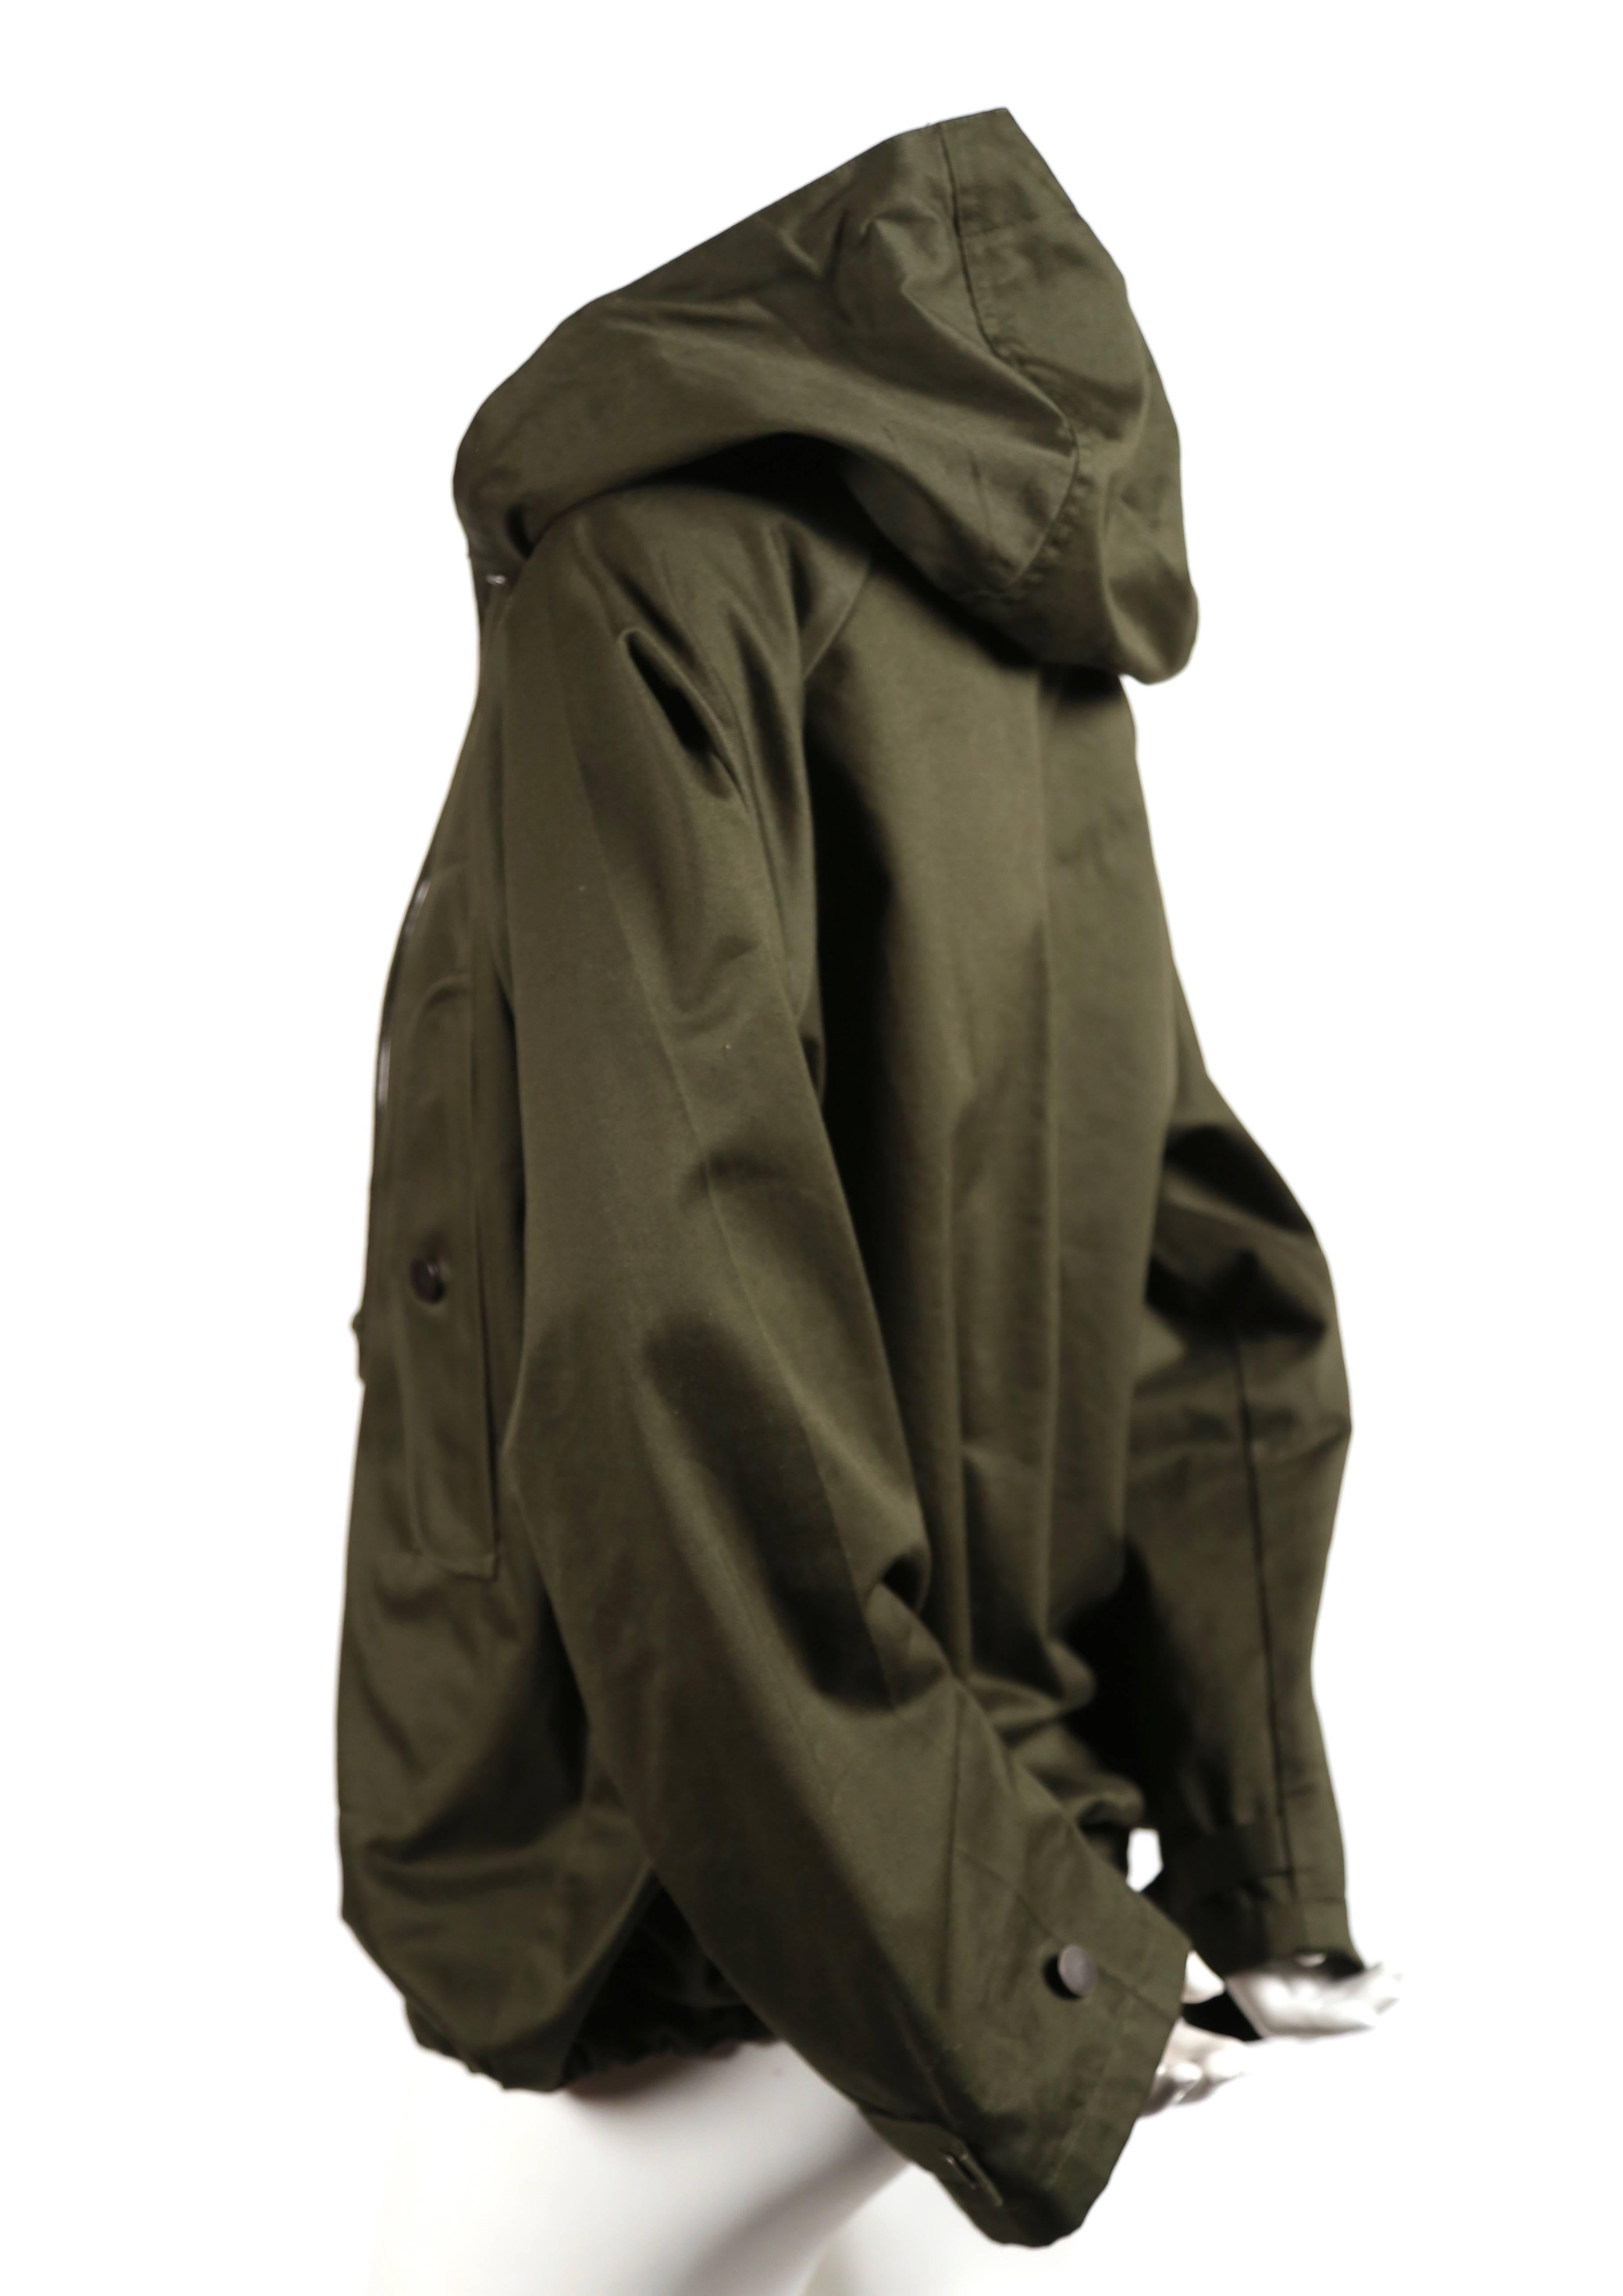 Army green anorak jacket in polished cotton designed by Phoebe Philo for Celine. French size M. Approximate measurements: shoulder 16